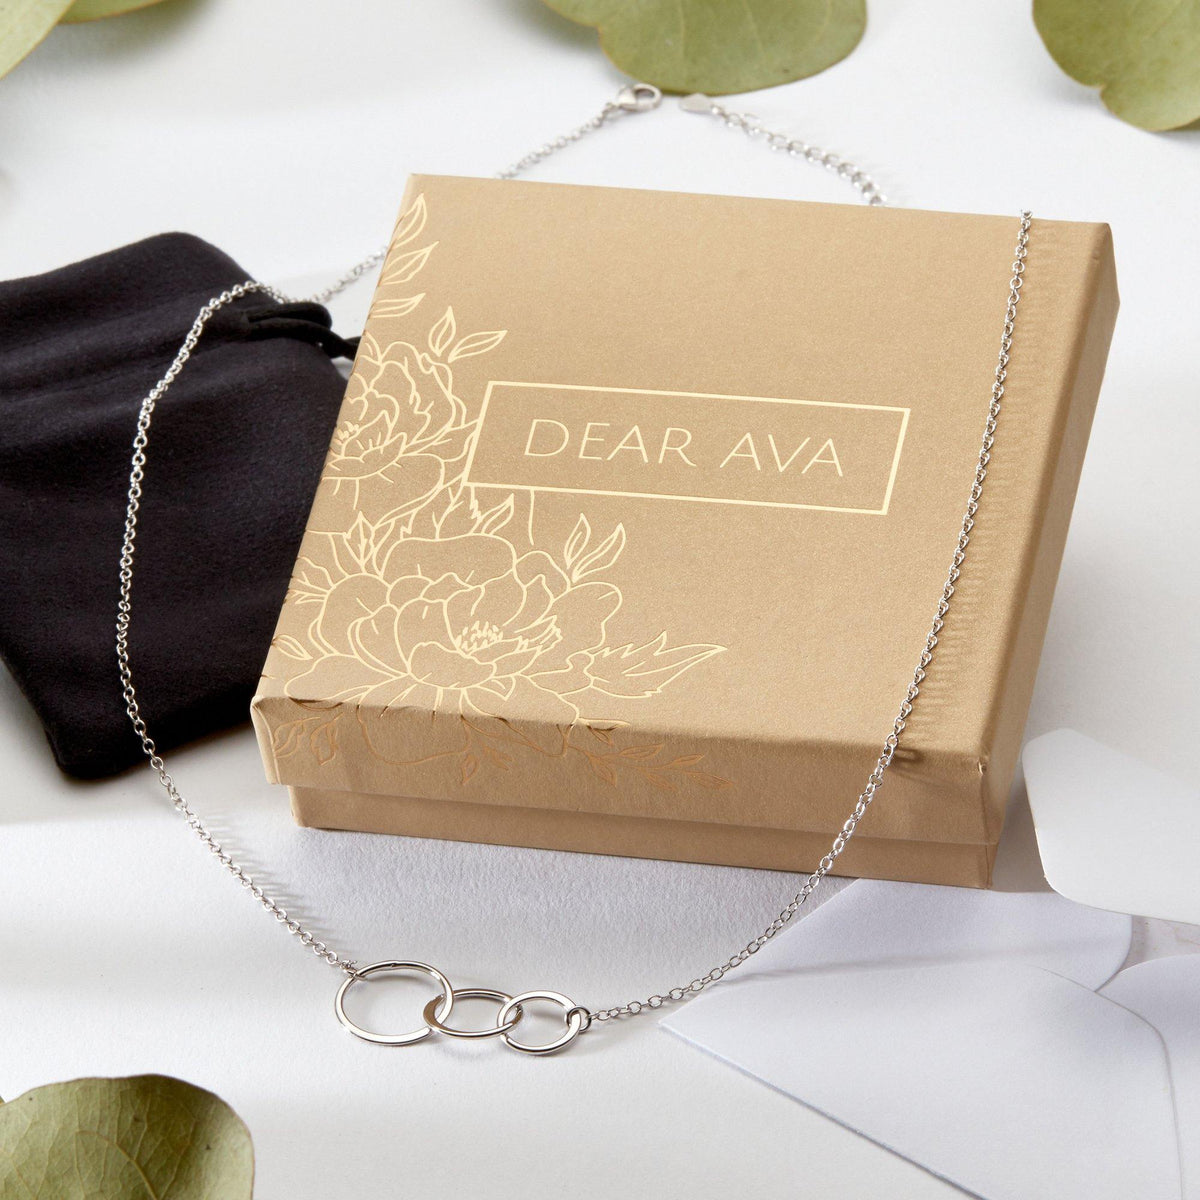 38th Birthday Necklace - Dear Ava, Jewelry / Necklaces / Pendants